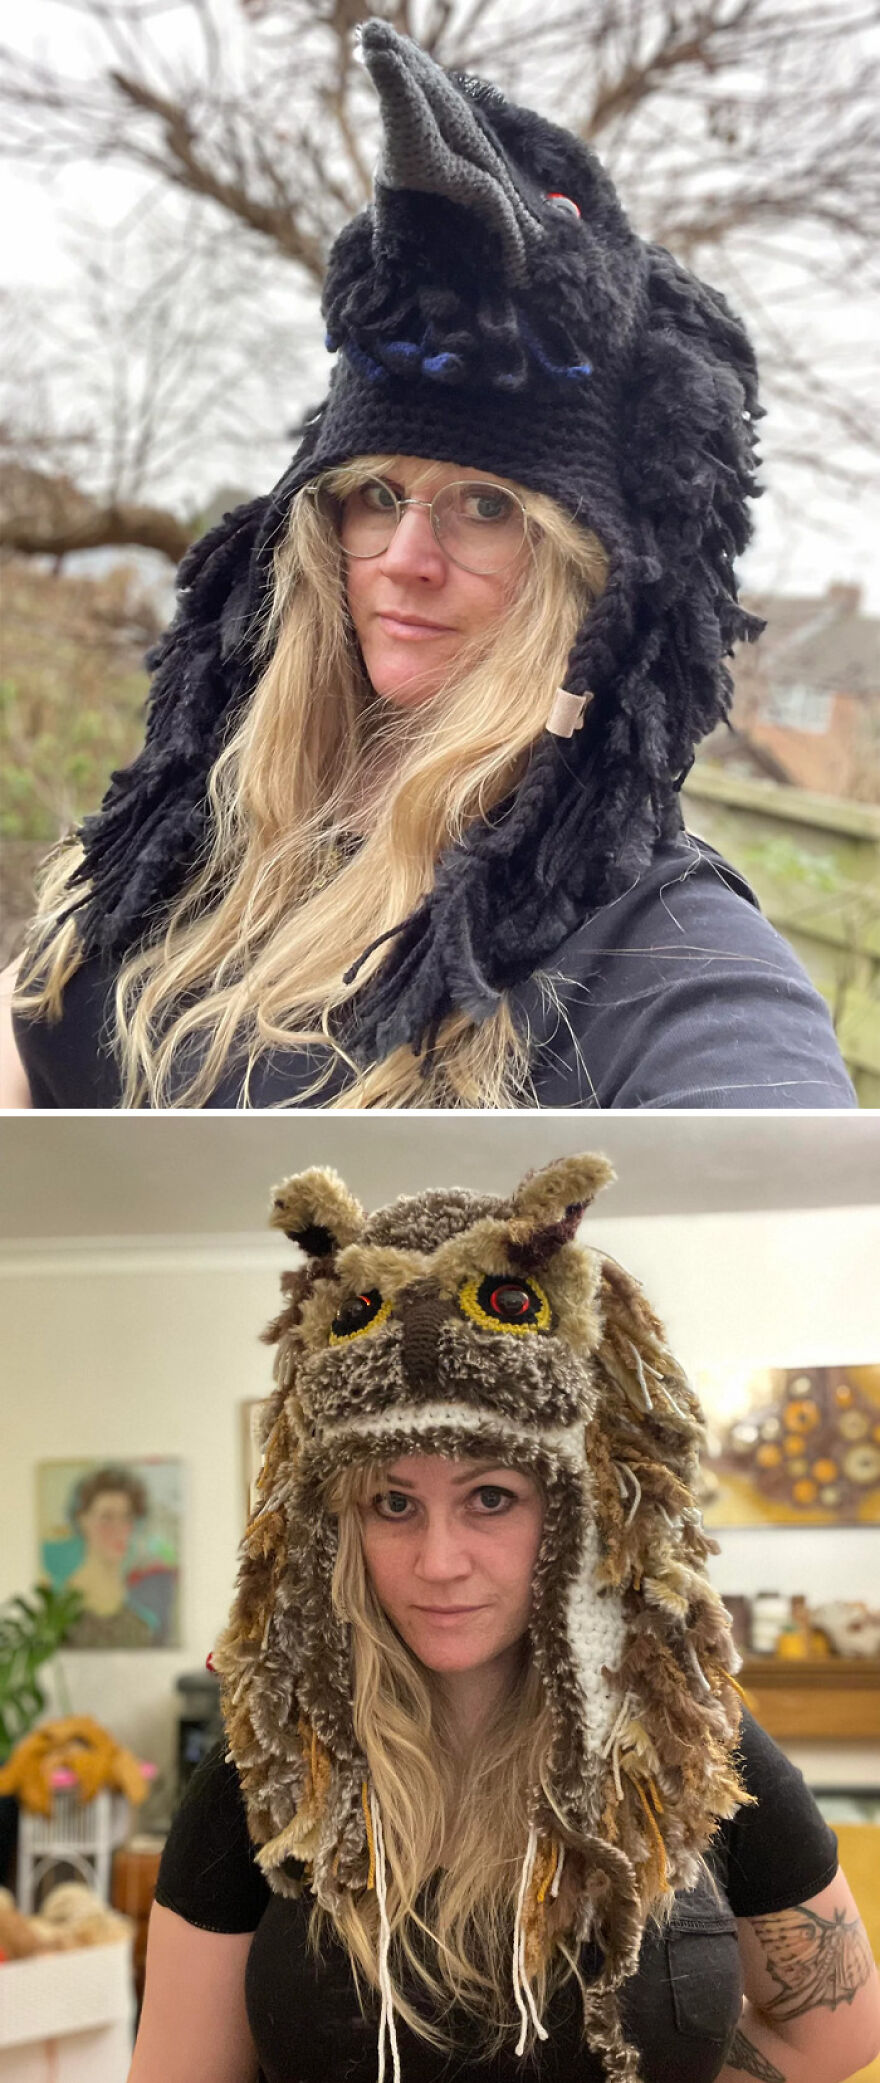 I’ve Been Crocheting Bird Hats. Here’s The First 2. A Raven And An Owl. I’m Really Tempted To Try A Cockatoo.🤣